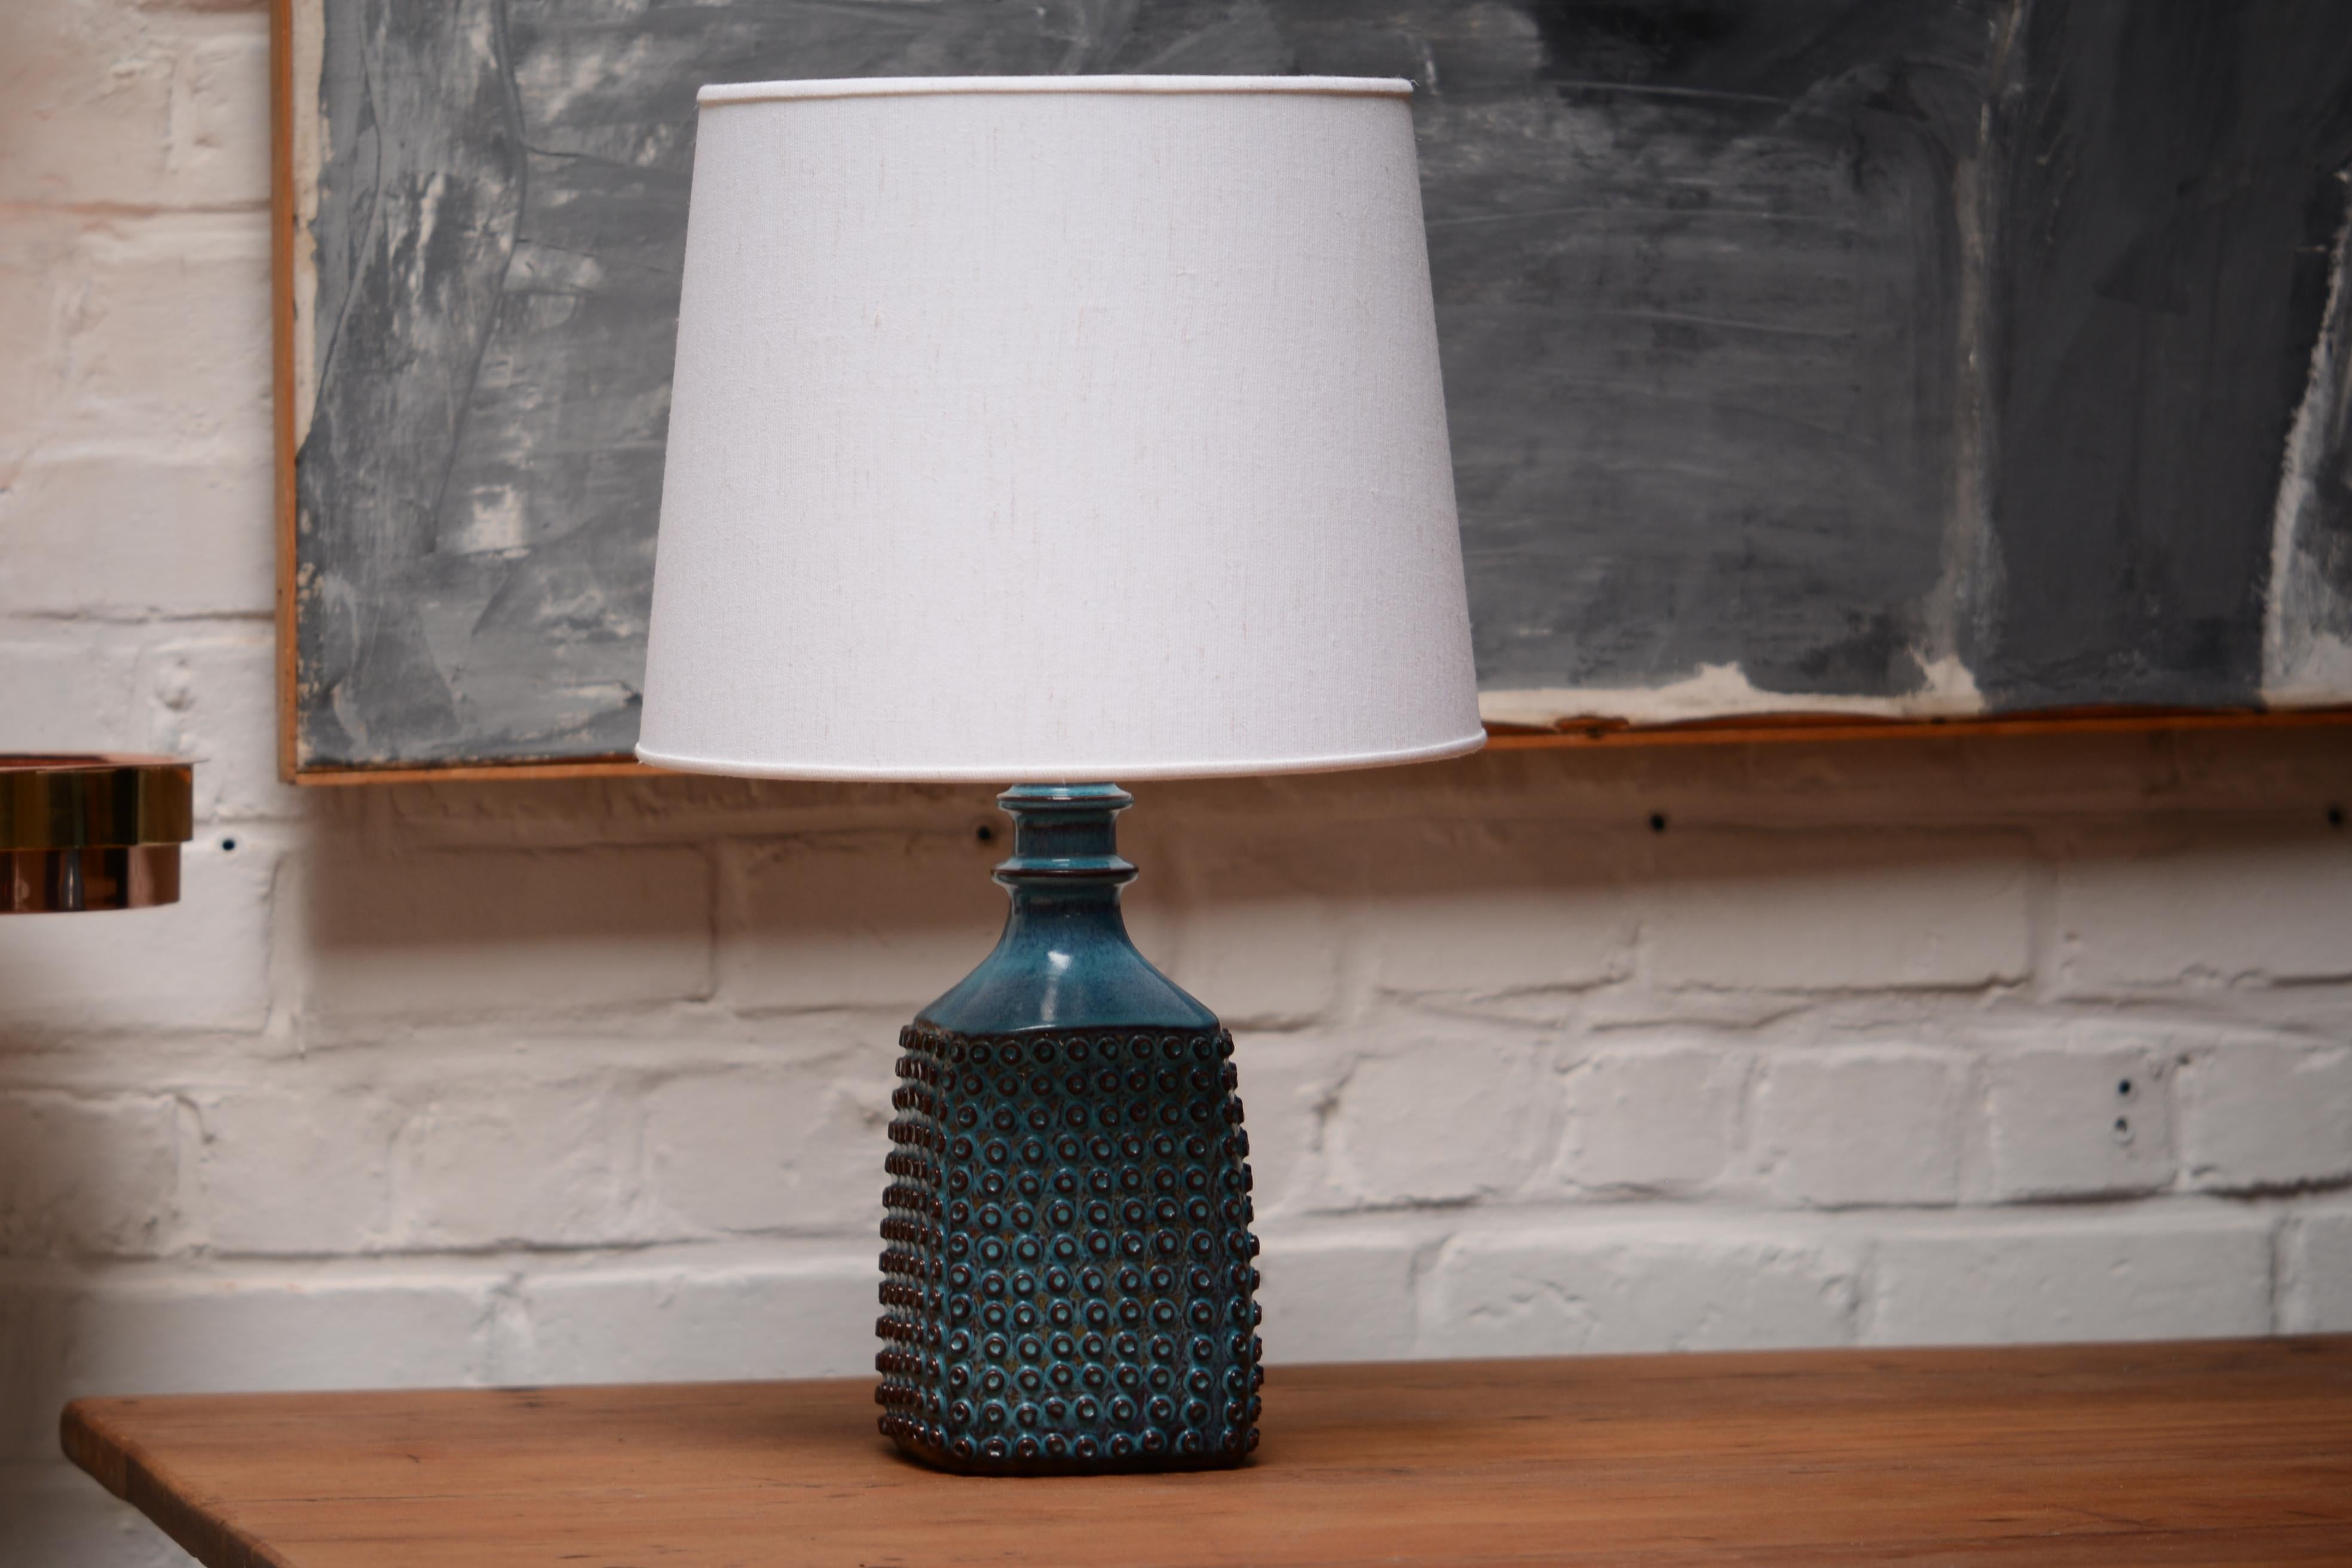 This is a very unique table lamp with the very famous blue glazed. Its a higher piece than usual. This is a real lamp not a vase that was transformed. You can see the glaze around the cable hole on the detail picture.

The lamp received a new